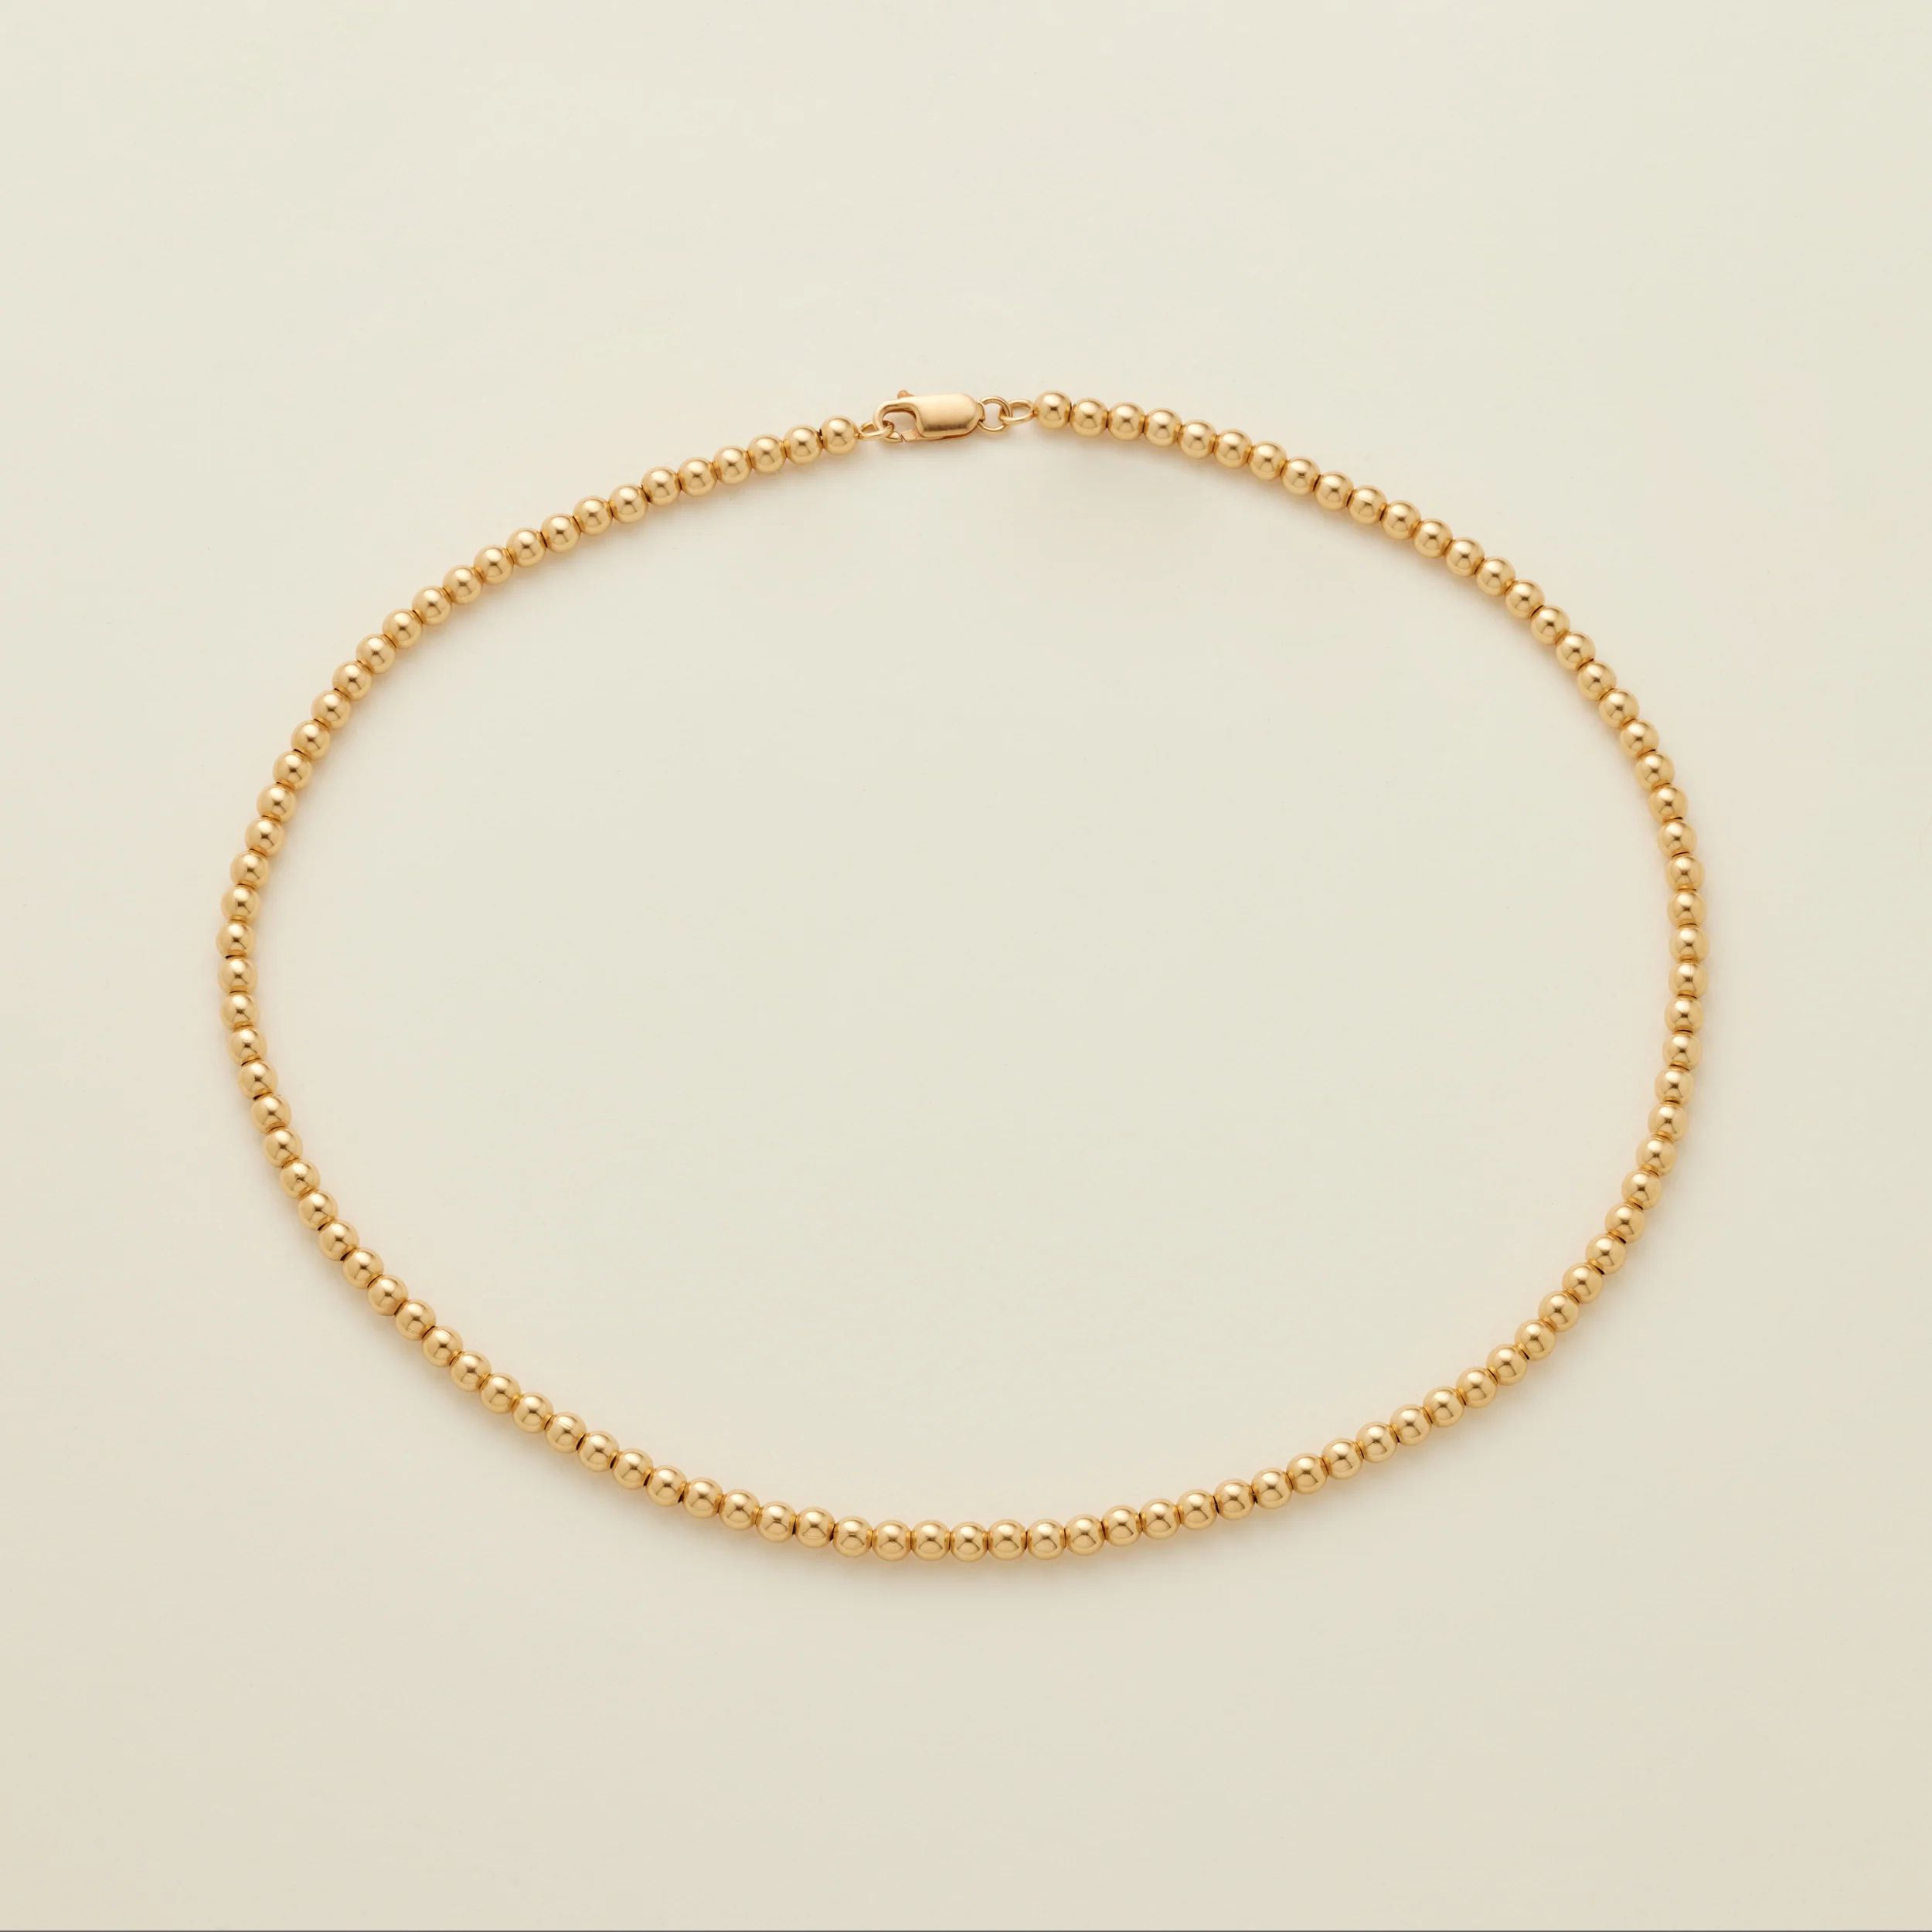 4mm Beverly Bead Necklace | Made by Mary (US)